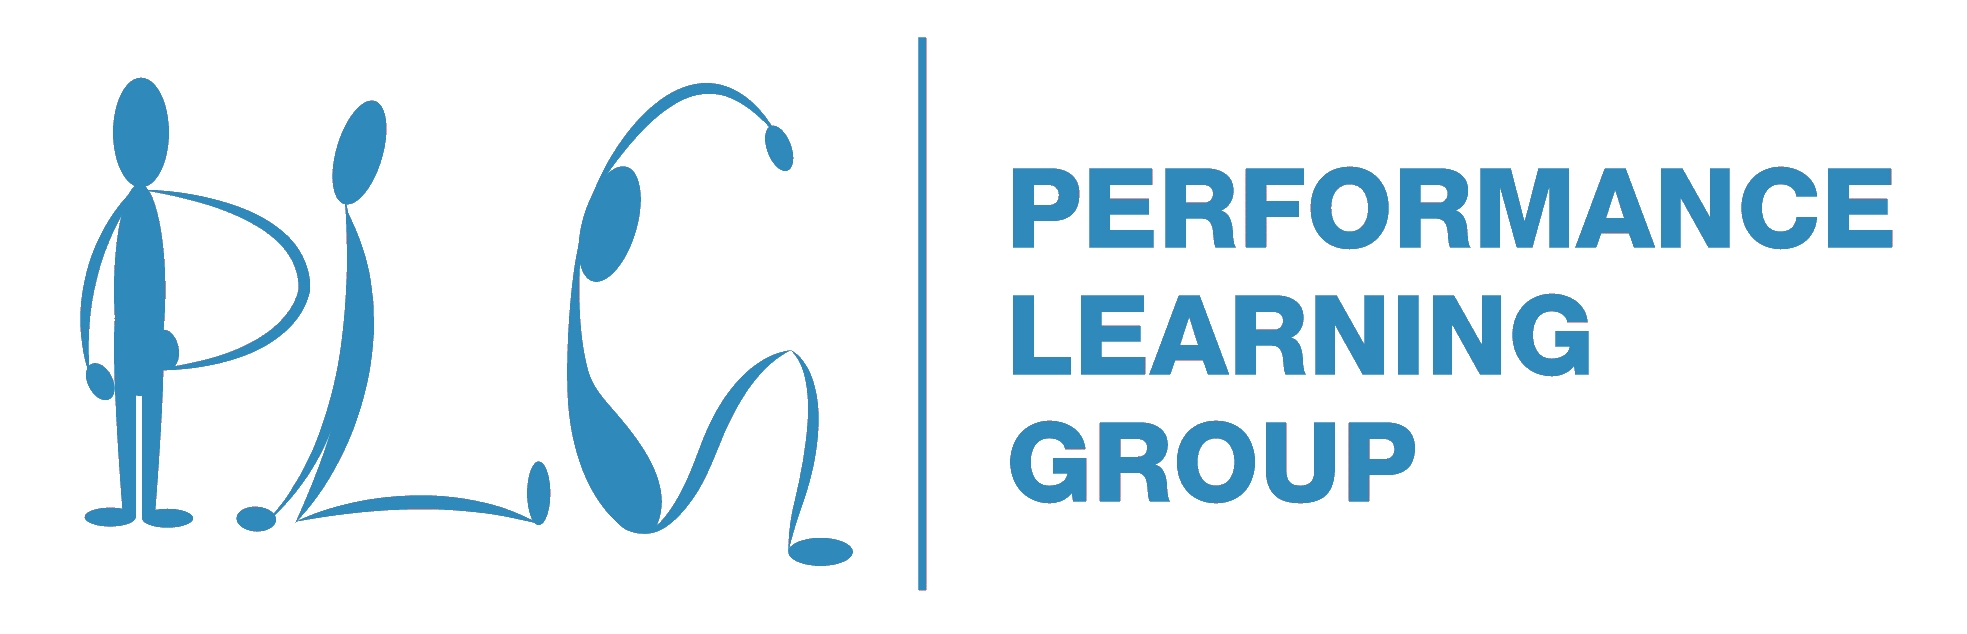 Performing Learning Group logo